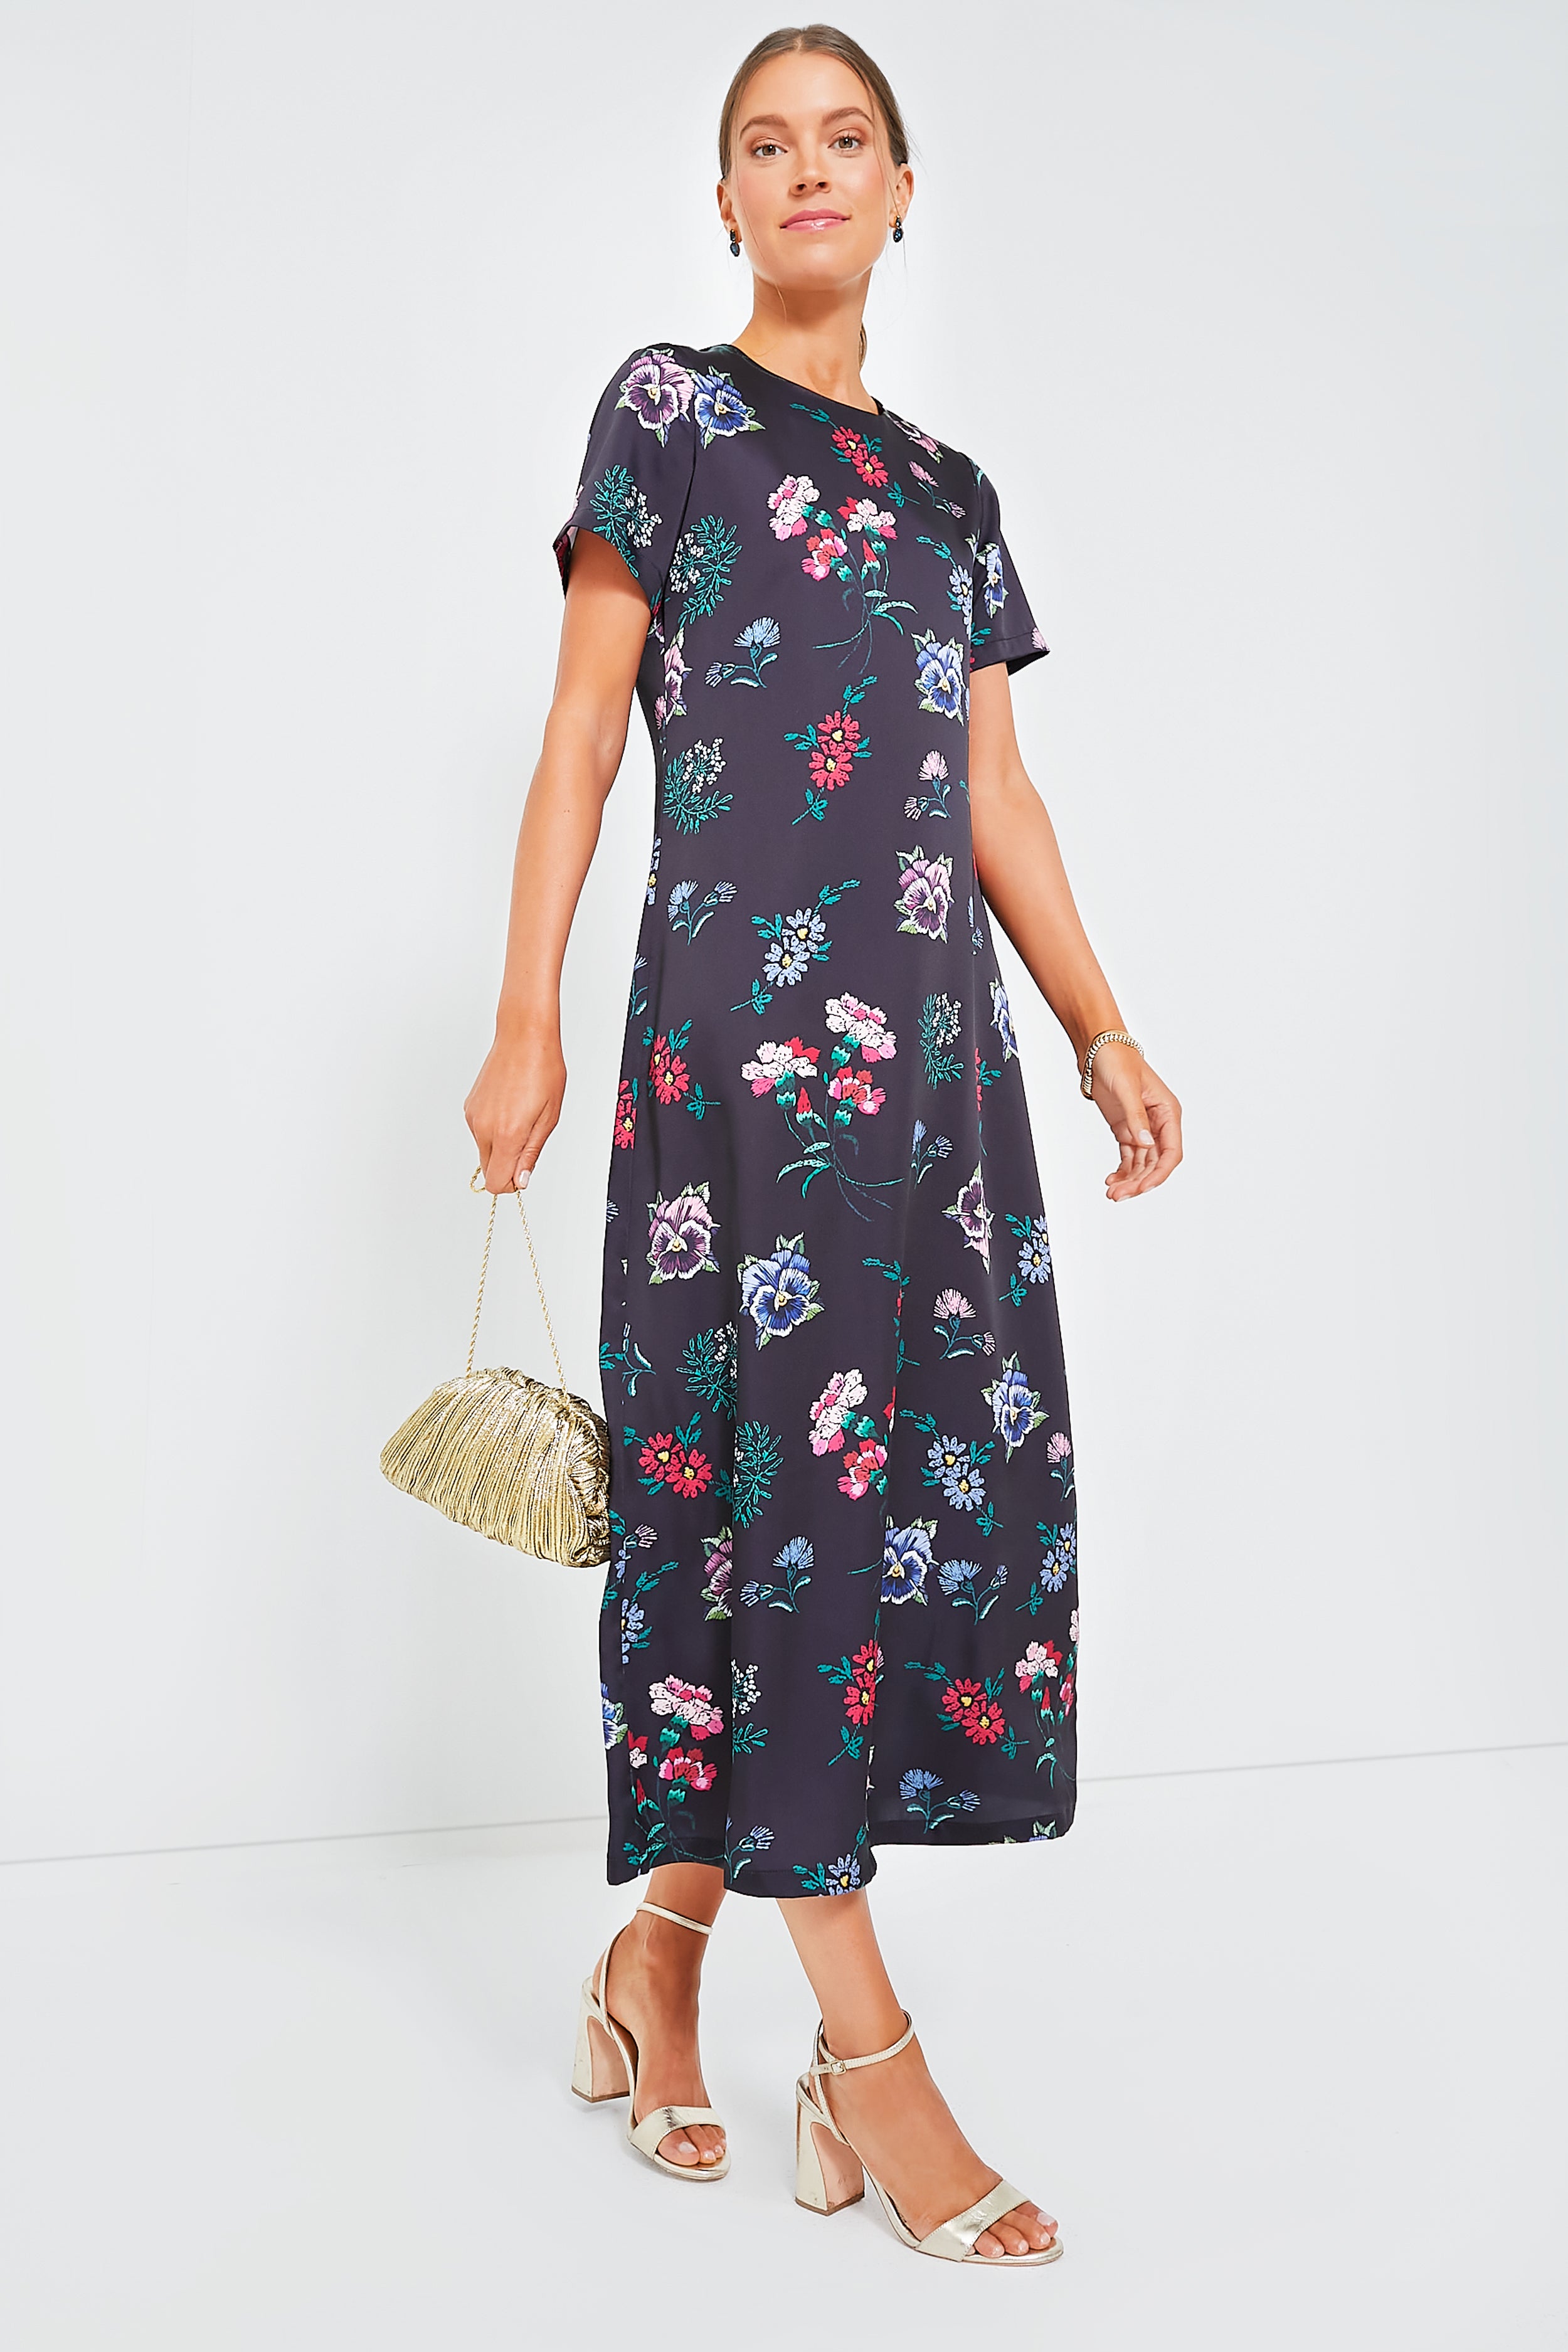 AND Grey & Black Floral Maxi in Delhi at best price by Admire Trader -  Justdial